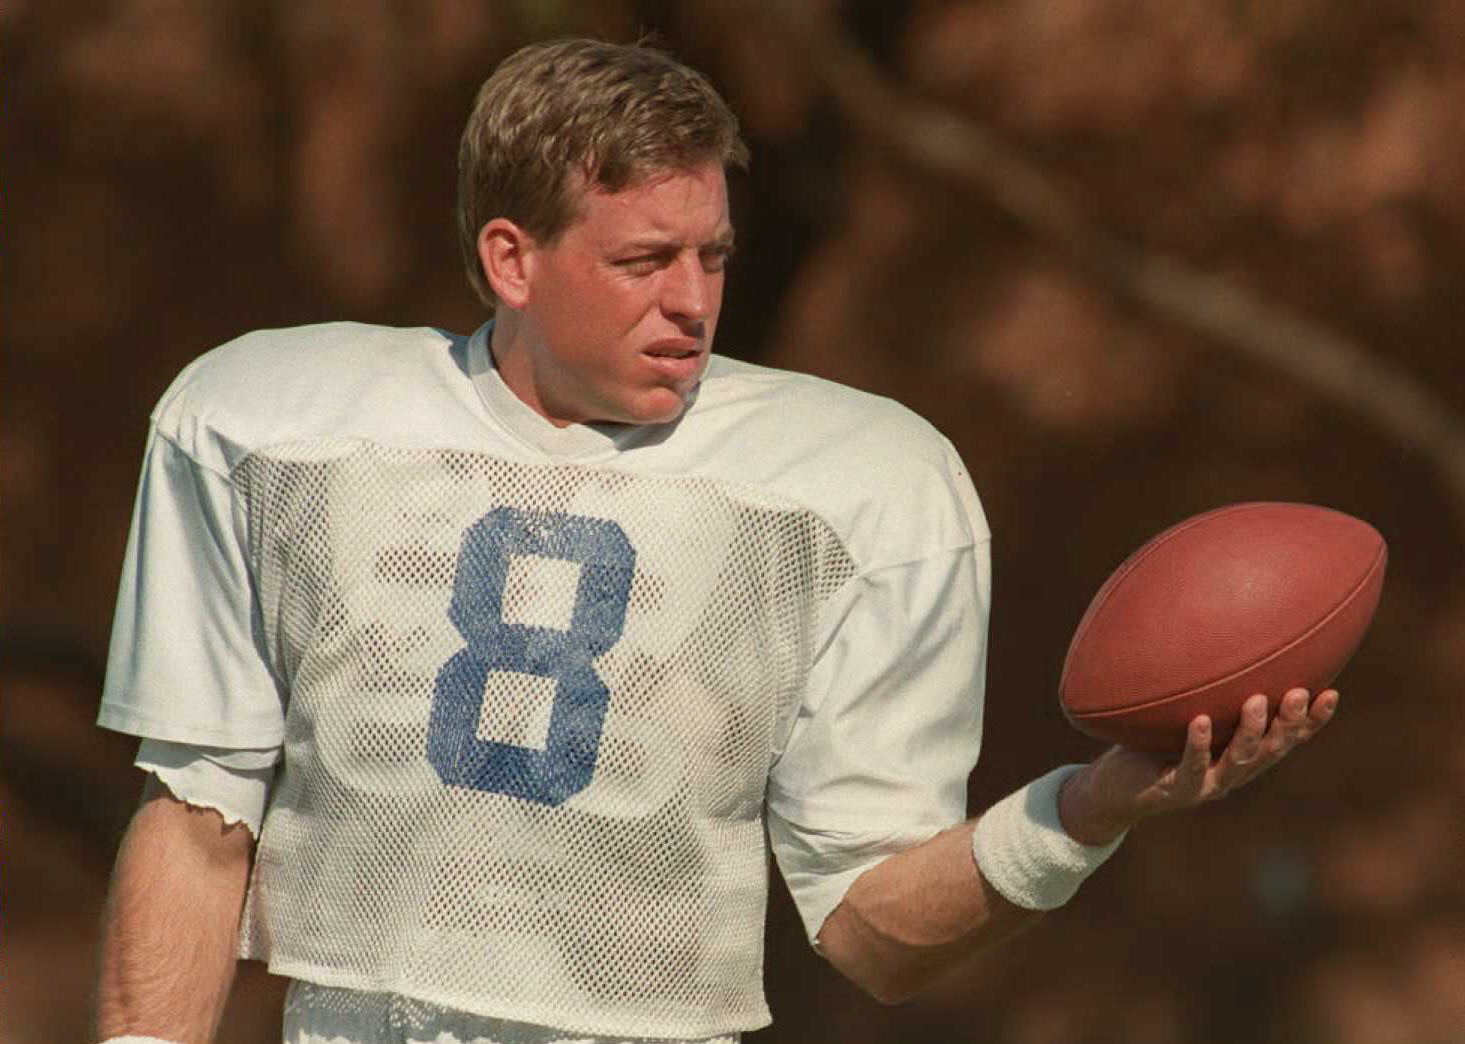 Troy Aikman’s Biggest Regret Is How He Overtrained During His Cowboys Career: ‘I Just Got Obsessed’